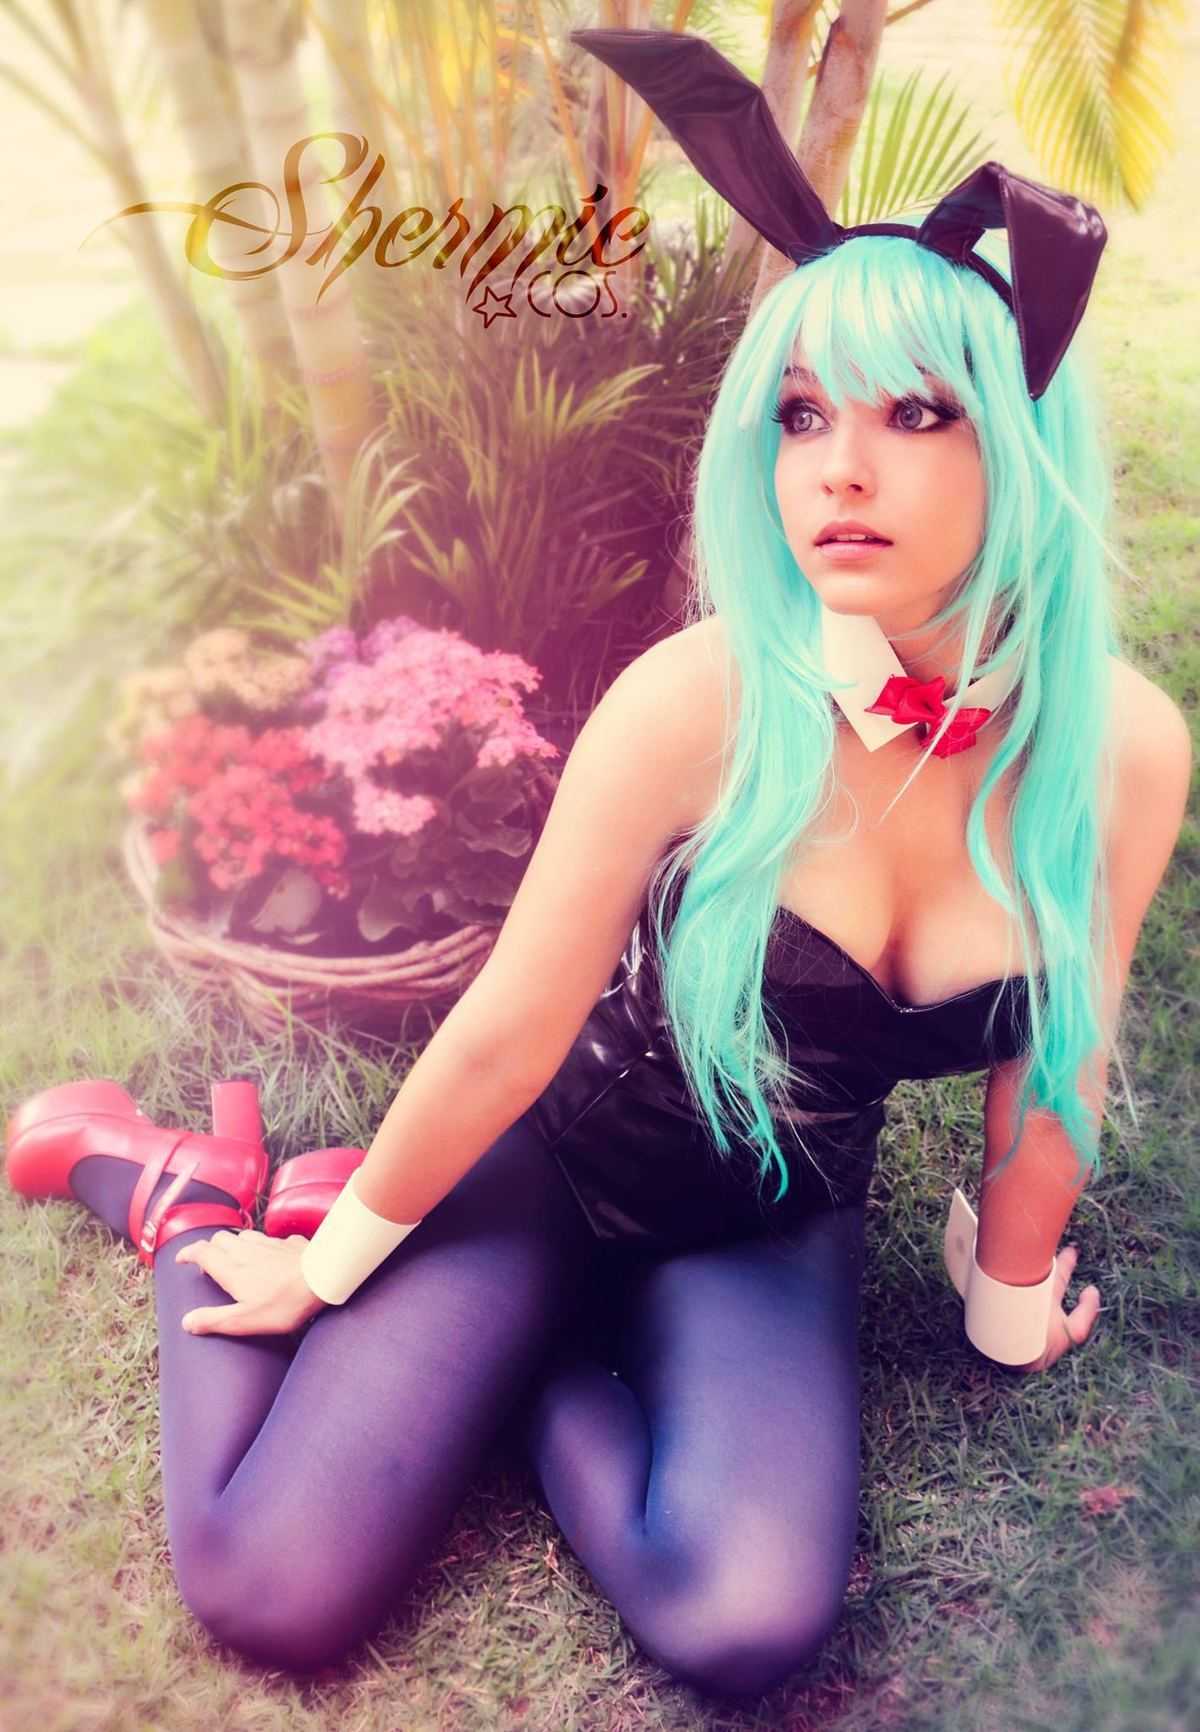 70+ Hot Pictures Of Bulma From Dragon Ball Z Are Sure To Get Your Heart Thumping Fast 164